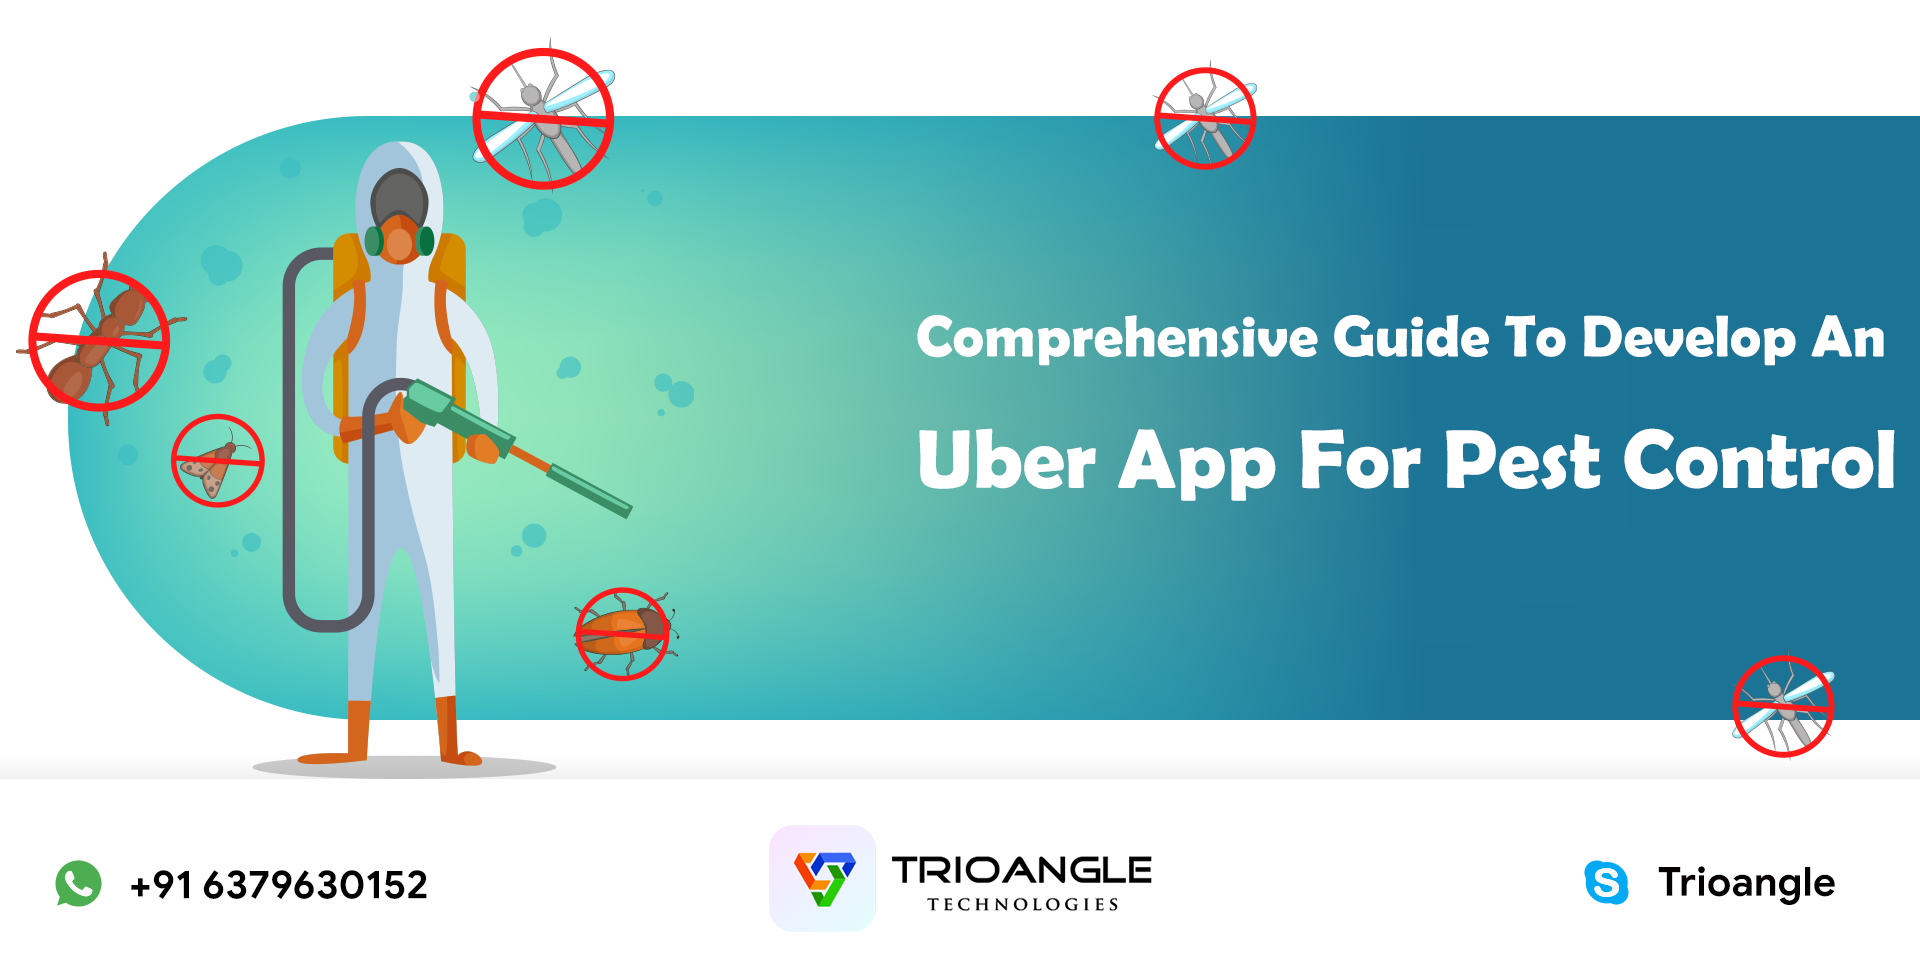 Article about Comprehensive Guide To Develop An Uber App For Pest Control